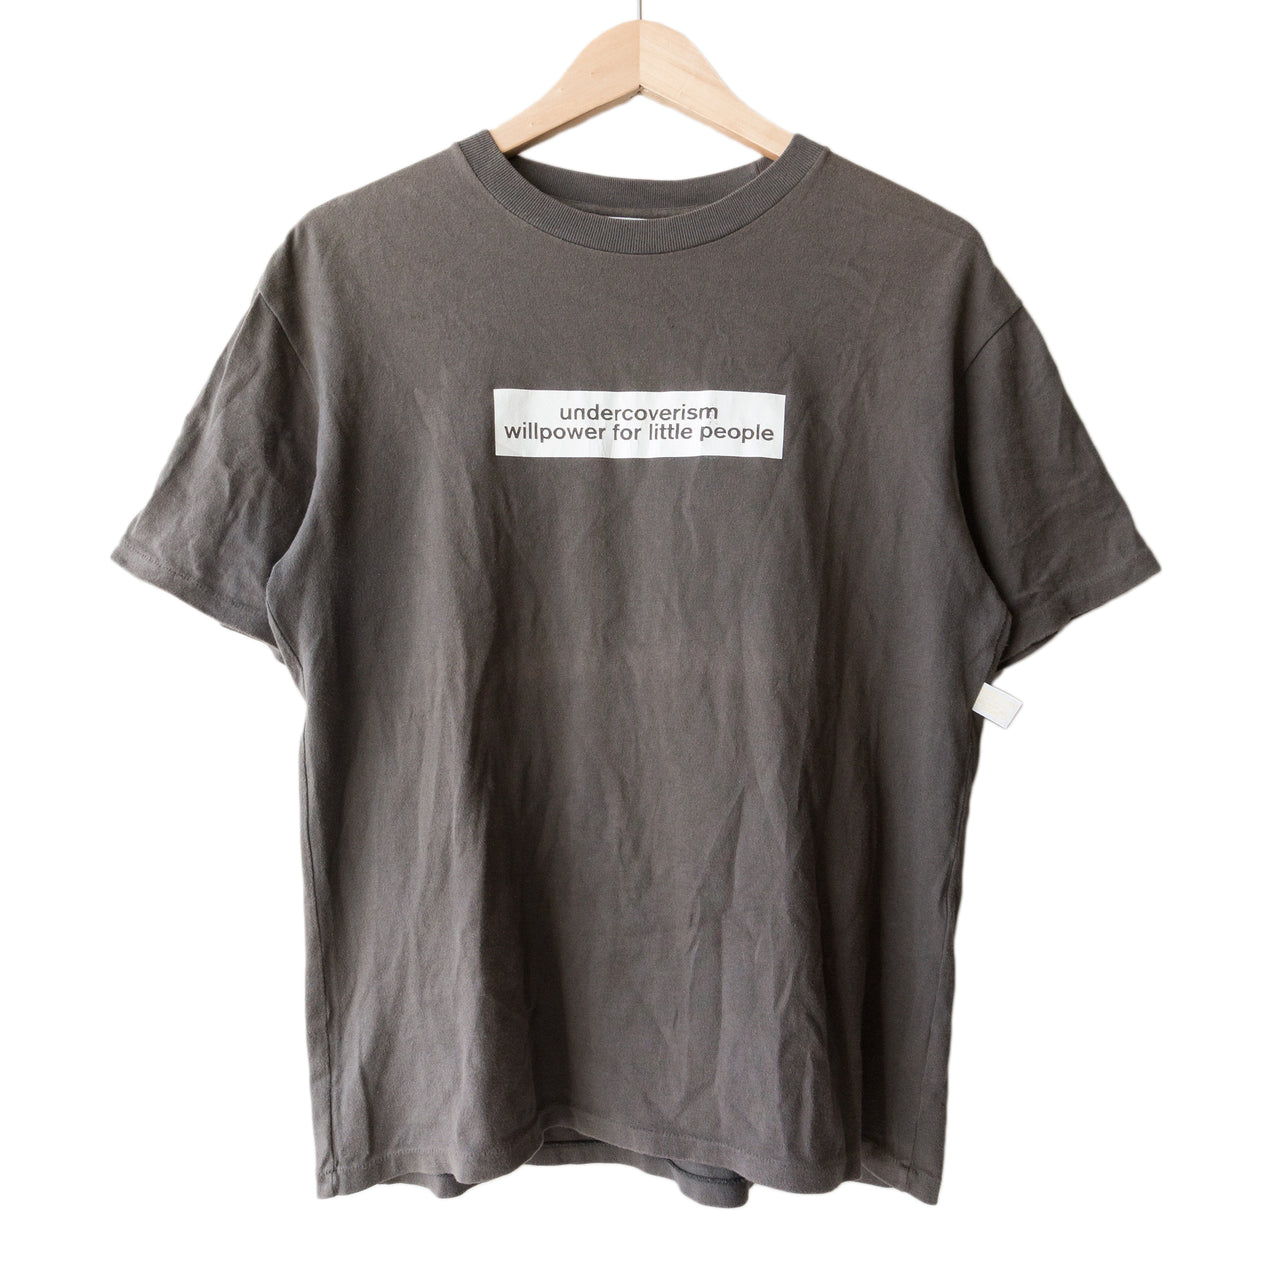 Undercover "Willpower for Little People" Tee - SS98 "Wet Summer"